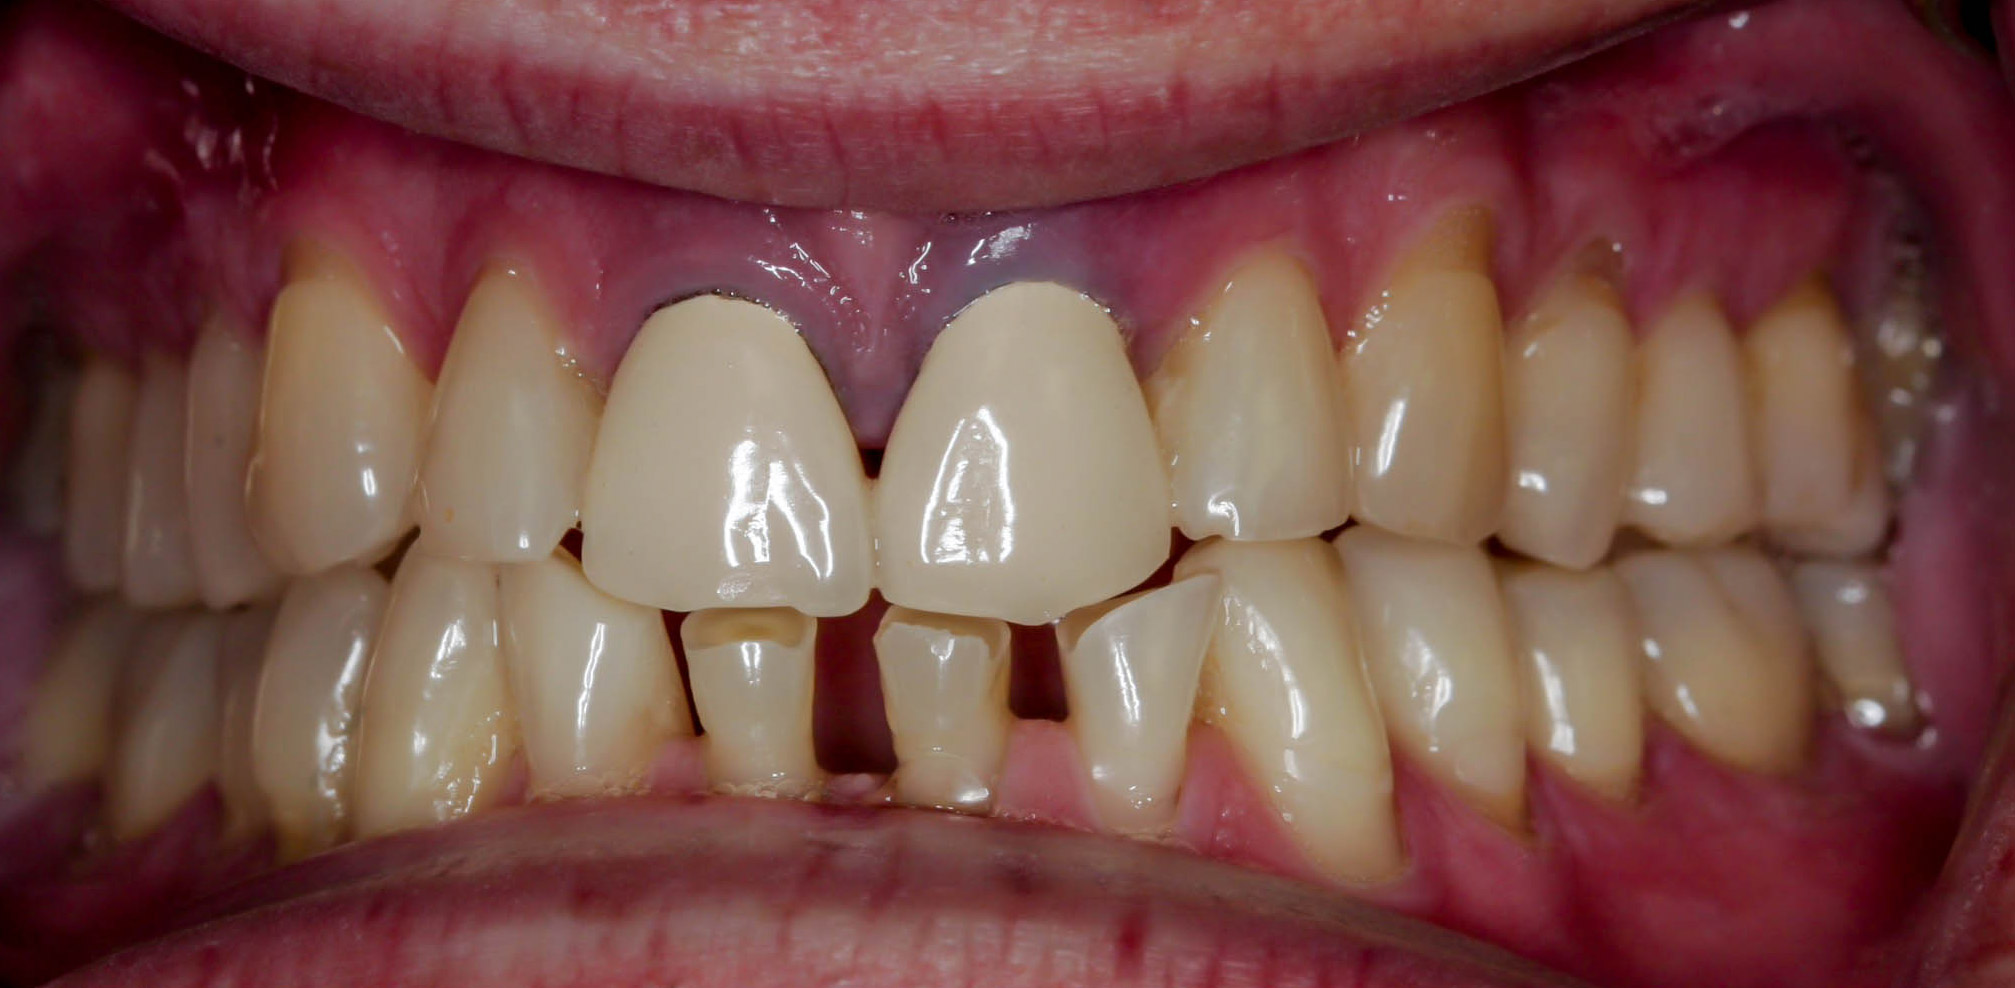 Smile makeover with crowns -- the Before picture